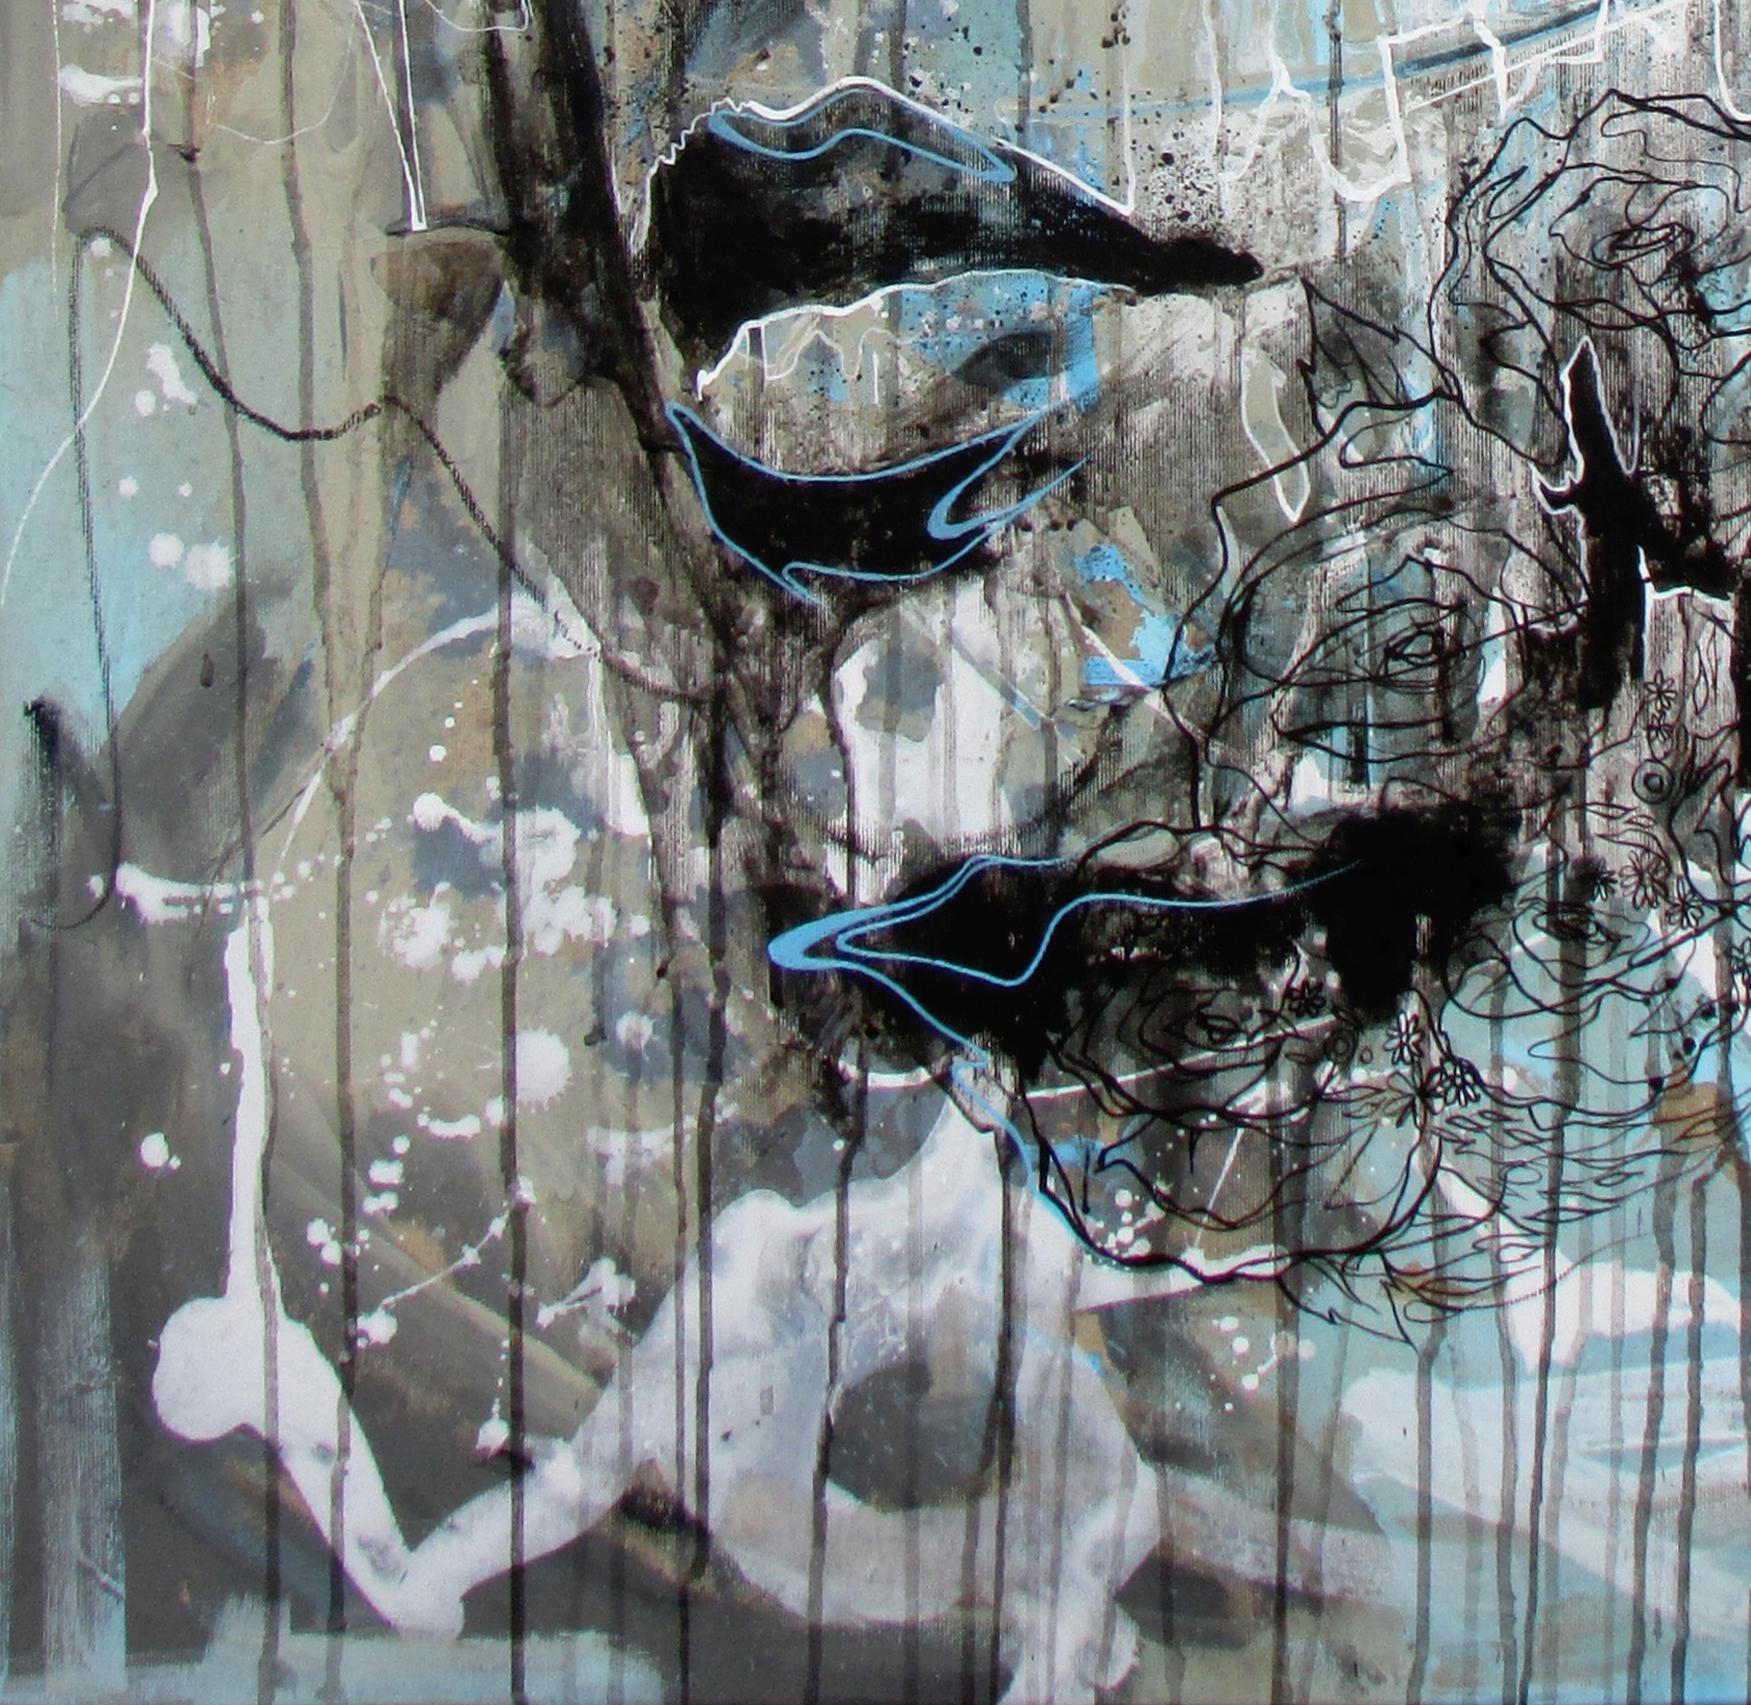 Catching My Daydreams - 21st Century, Contemporary Painting, Modern Portrait - Gray Portrait Painting by Danny O'Connor